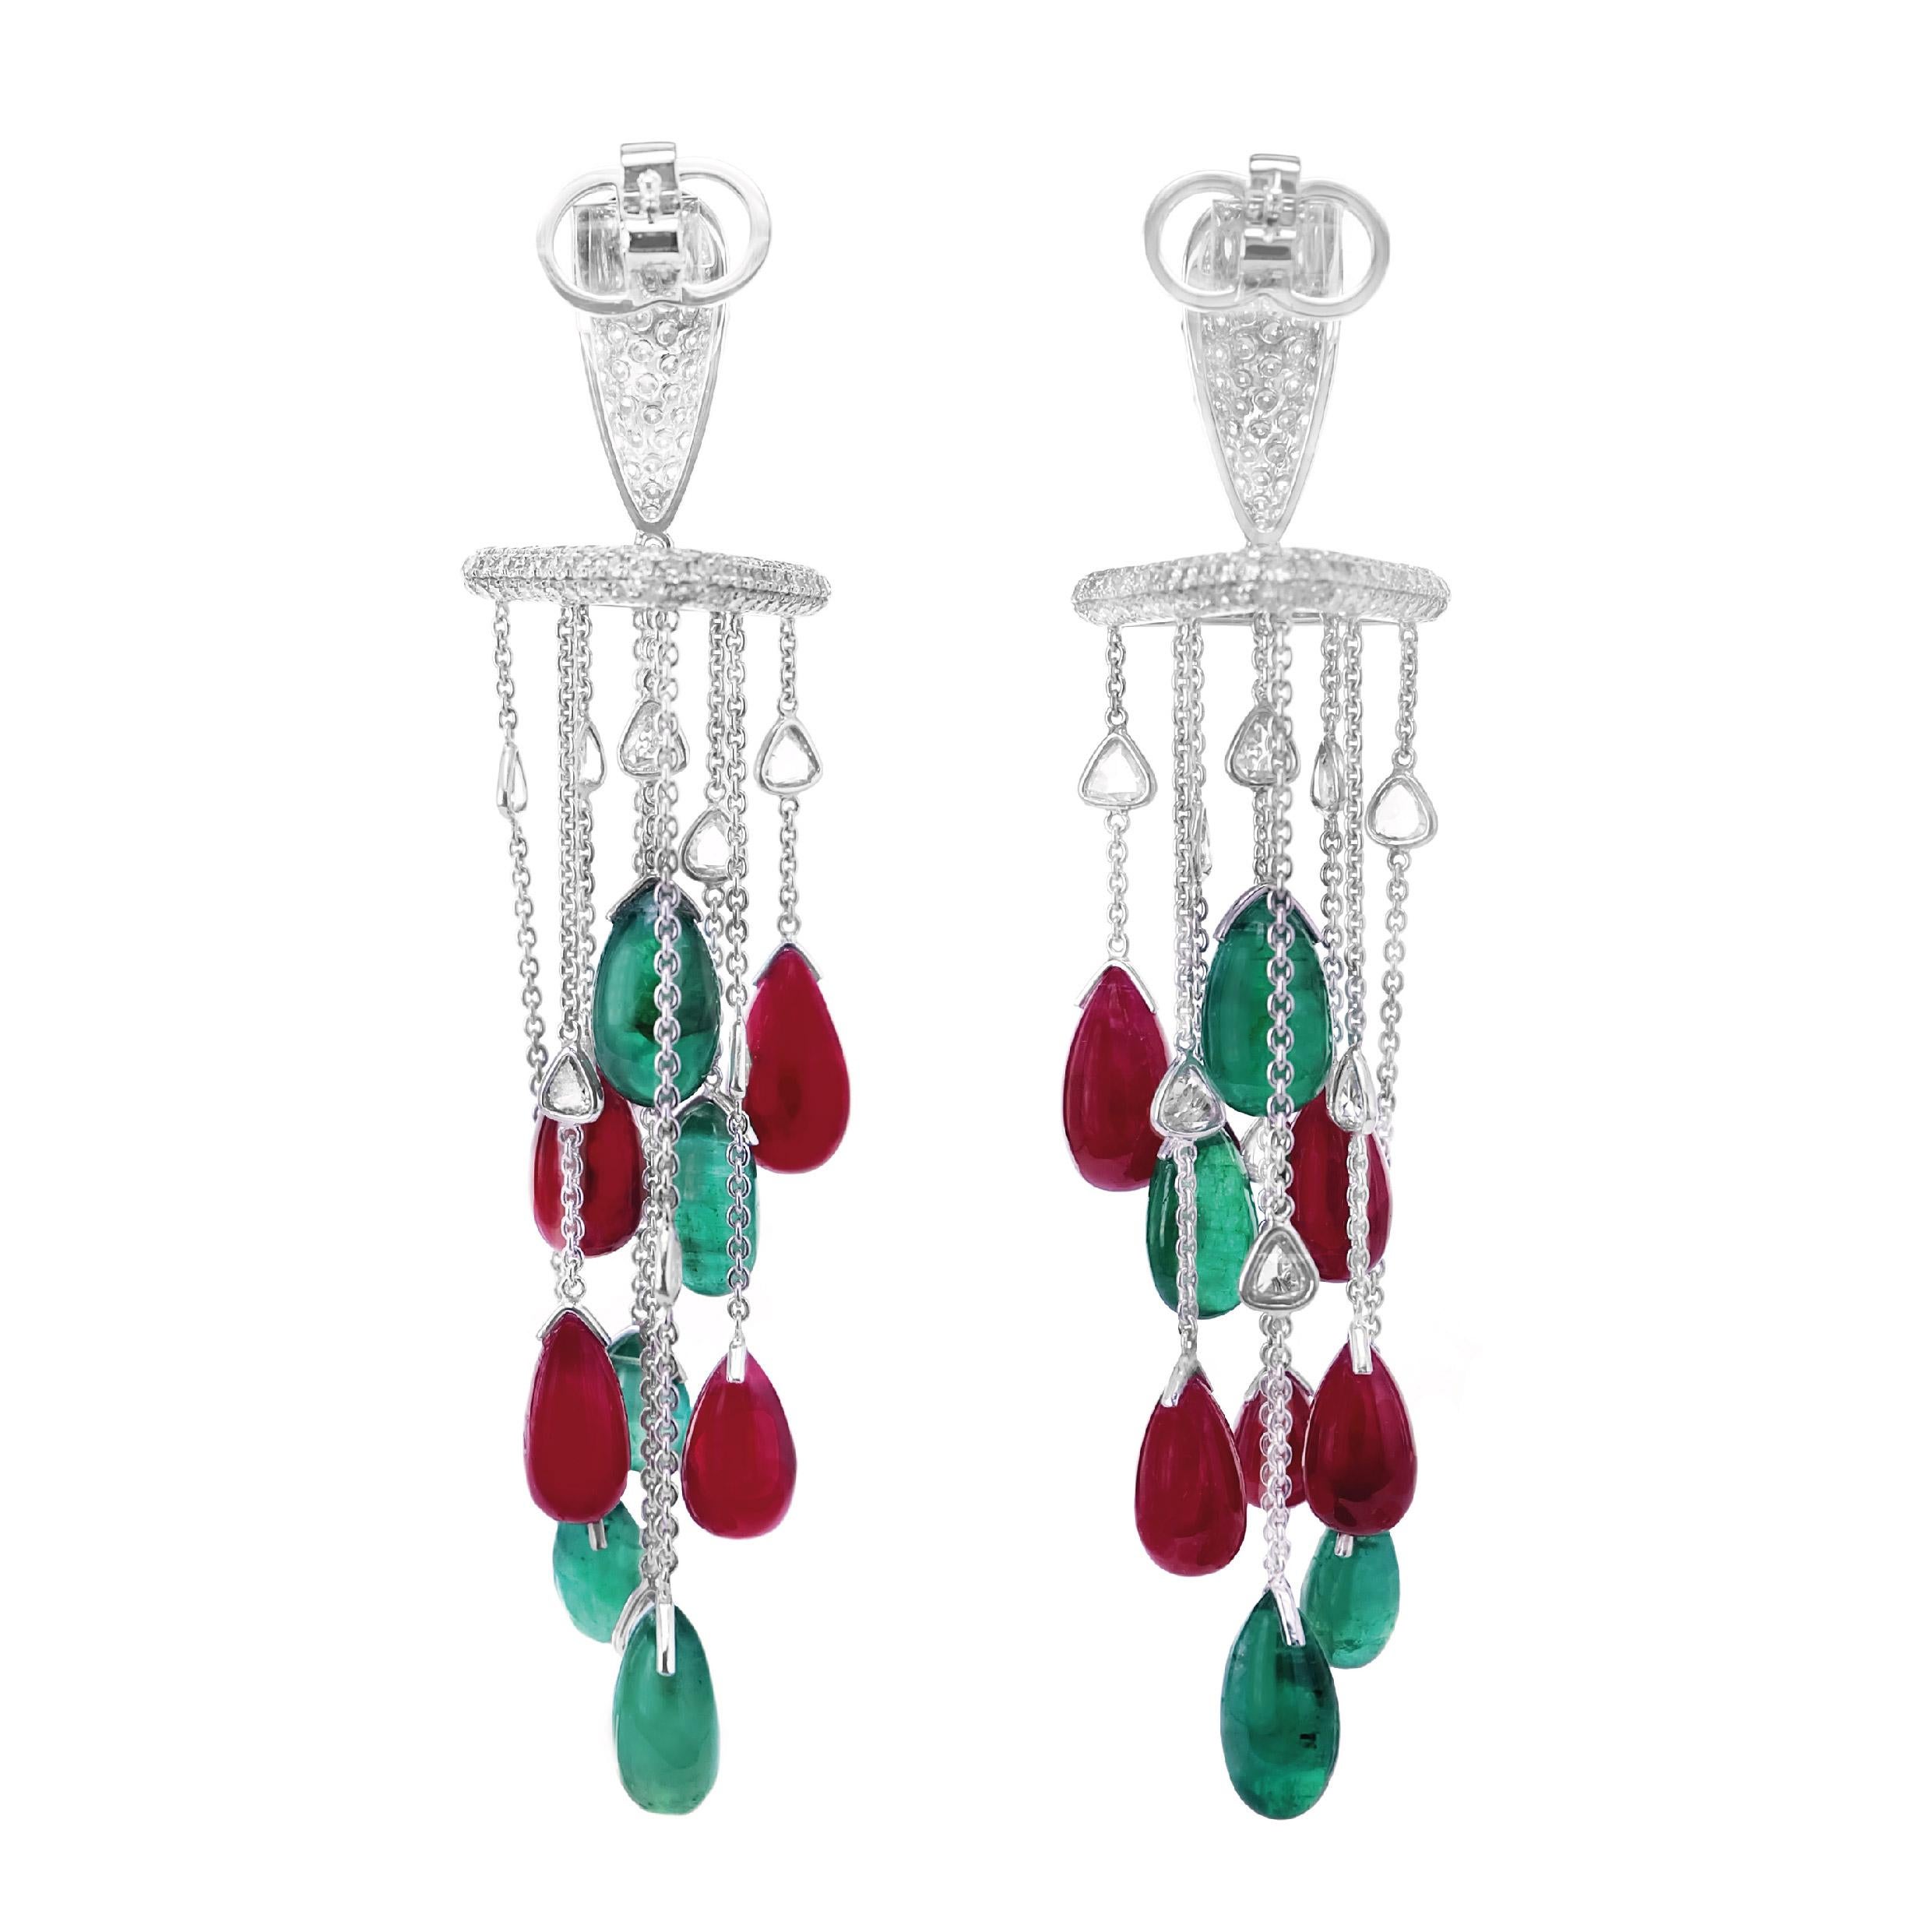 Briolette Cut 'Equilibrium' Earring Featured Ruby Emerald Diamond Cocktail Stunner For Sale